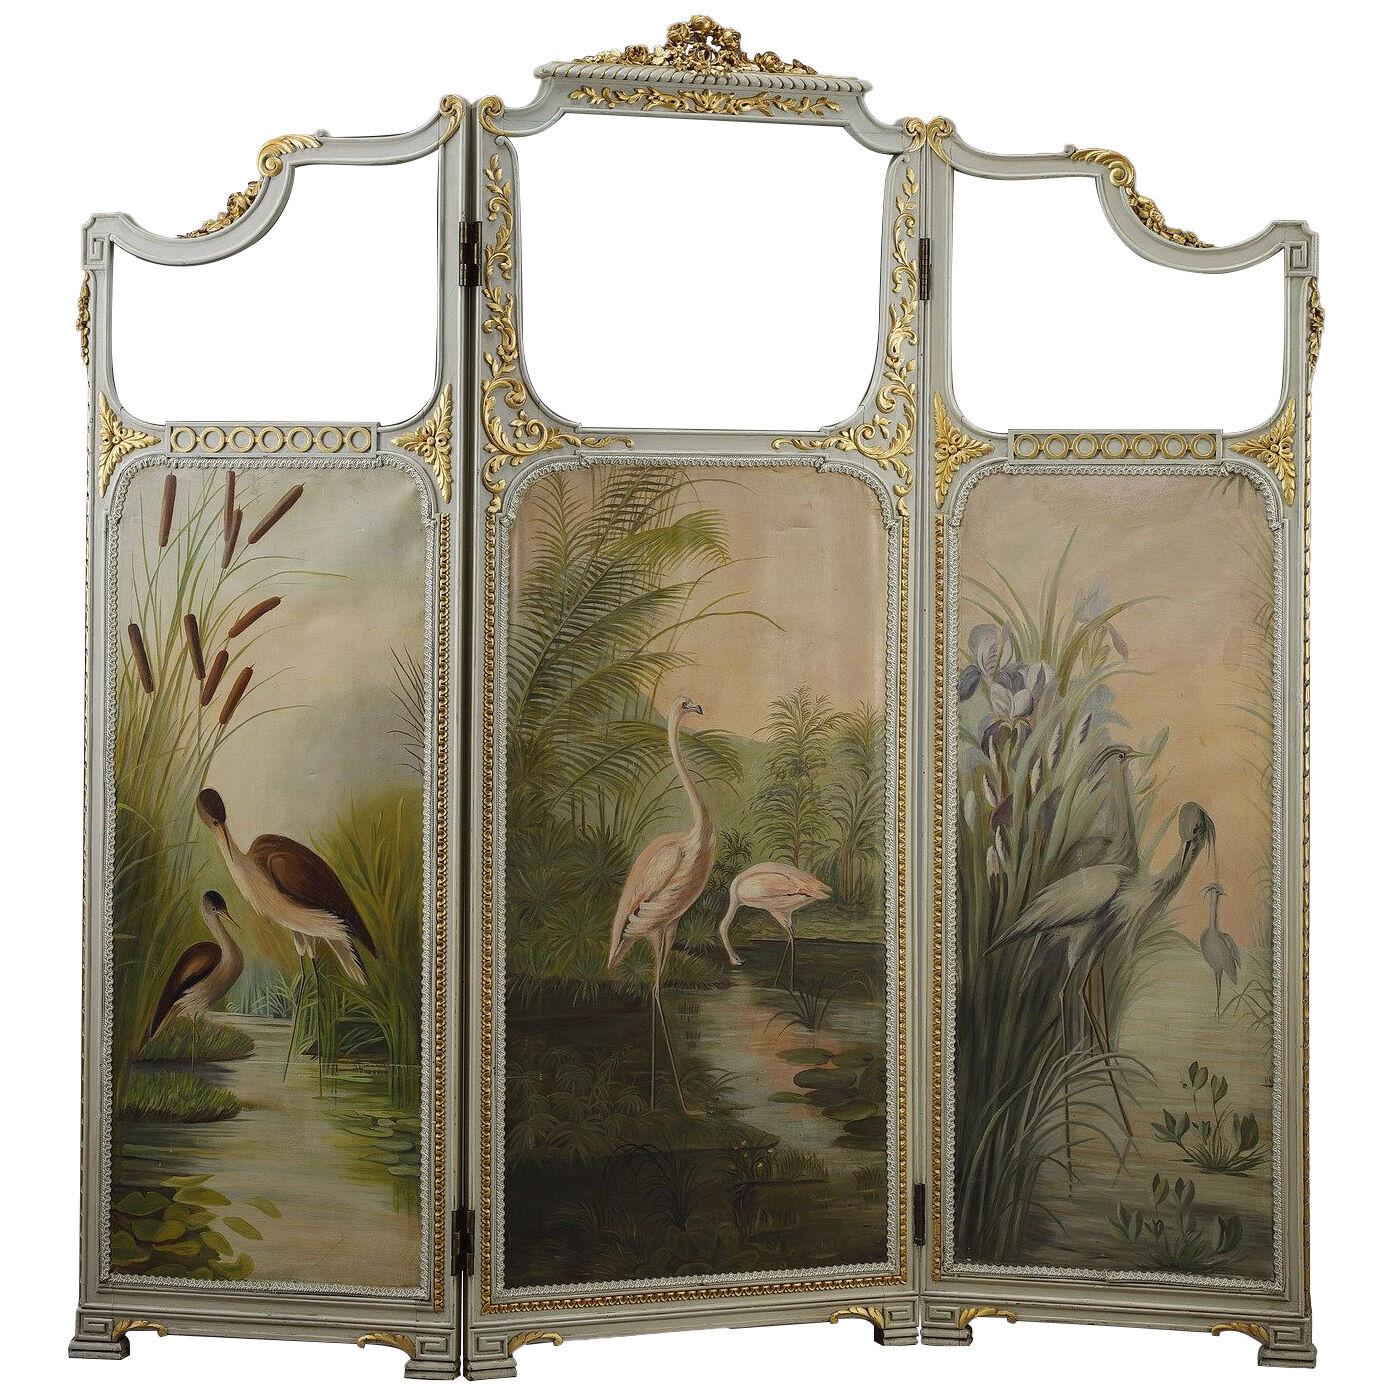 Louis XVI style screen in carved wood with waders